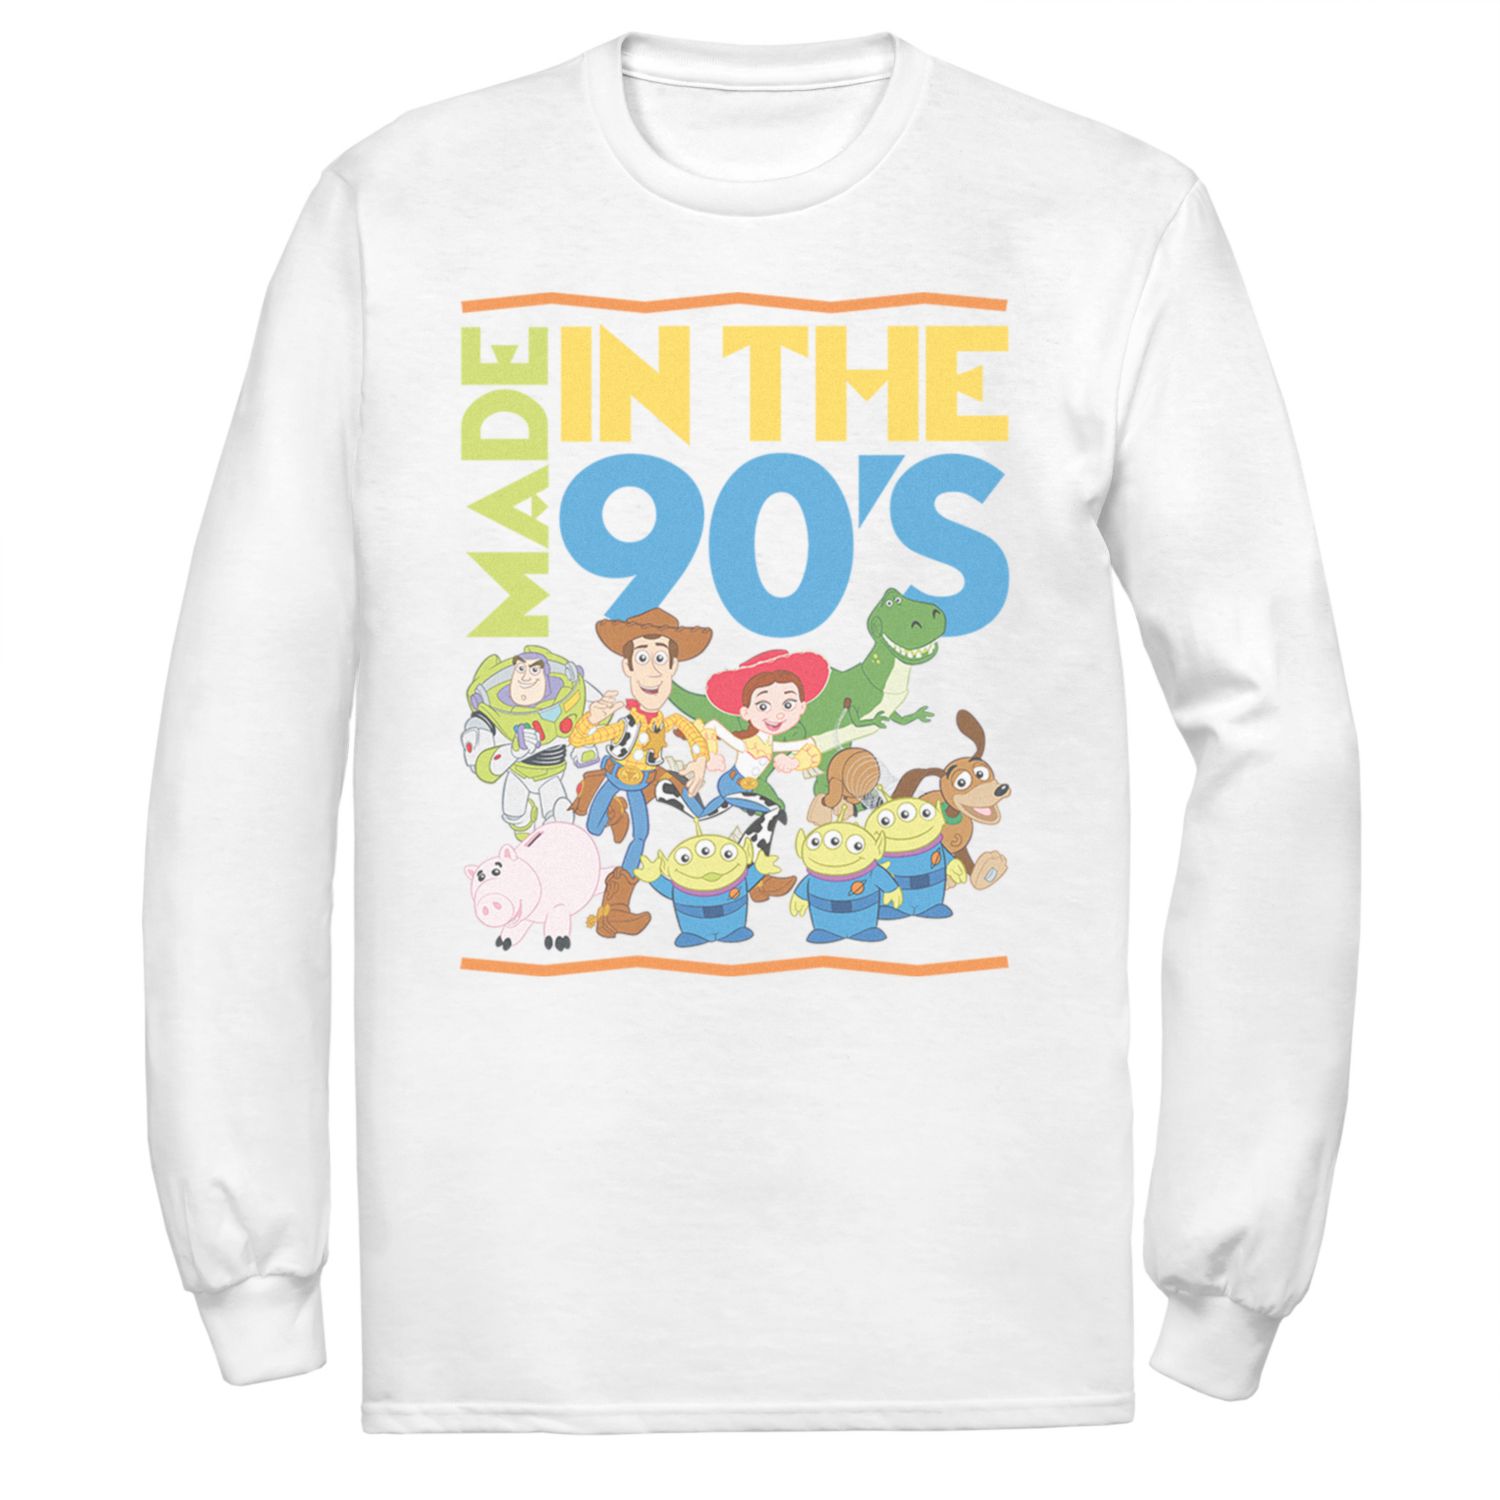 Image for Licensed Character Men's Toy Story "Made In The 90's" Graphic Tee at Kohl's.